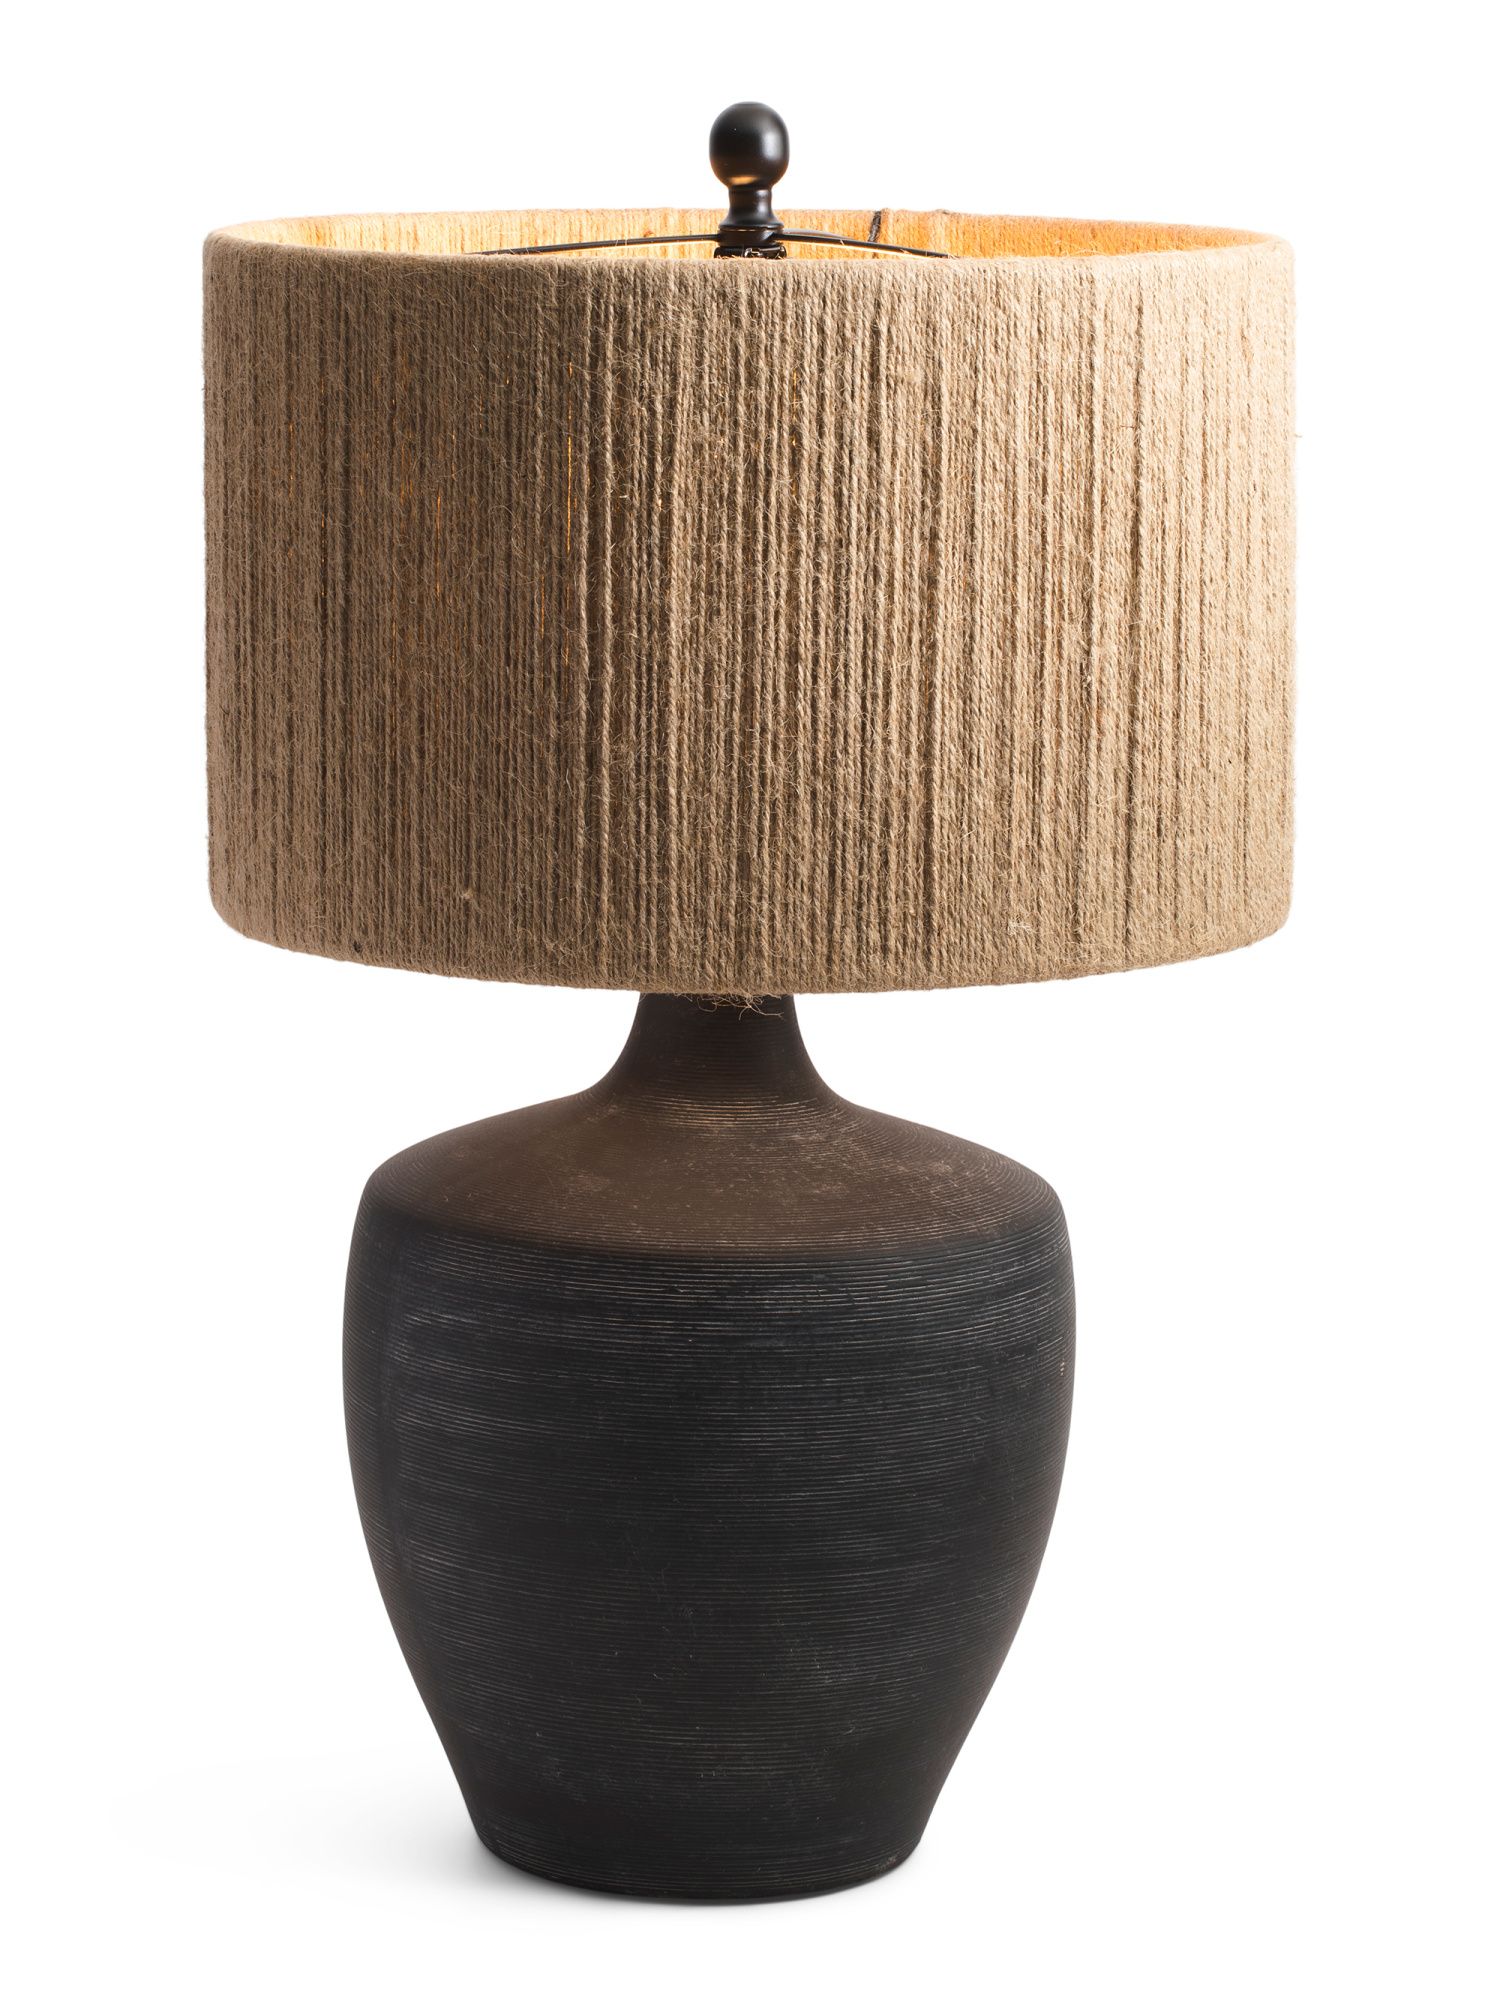 24in Ceramic Pot Lamp With Rope Shade | TJ Maxx